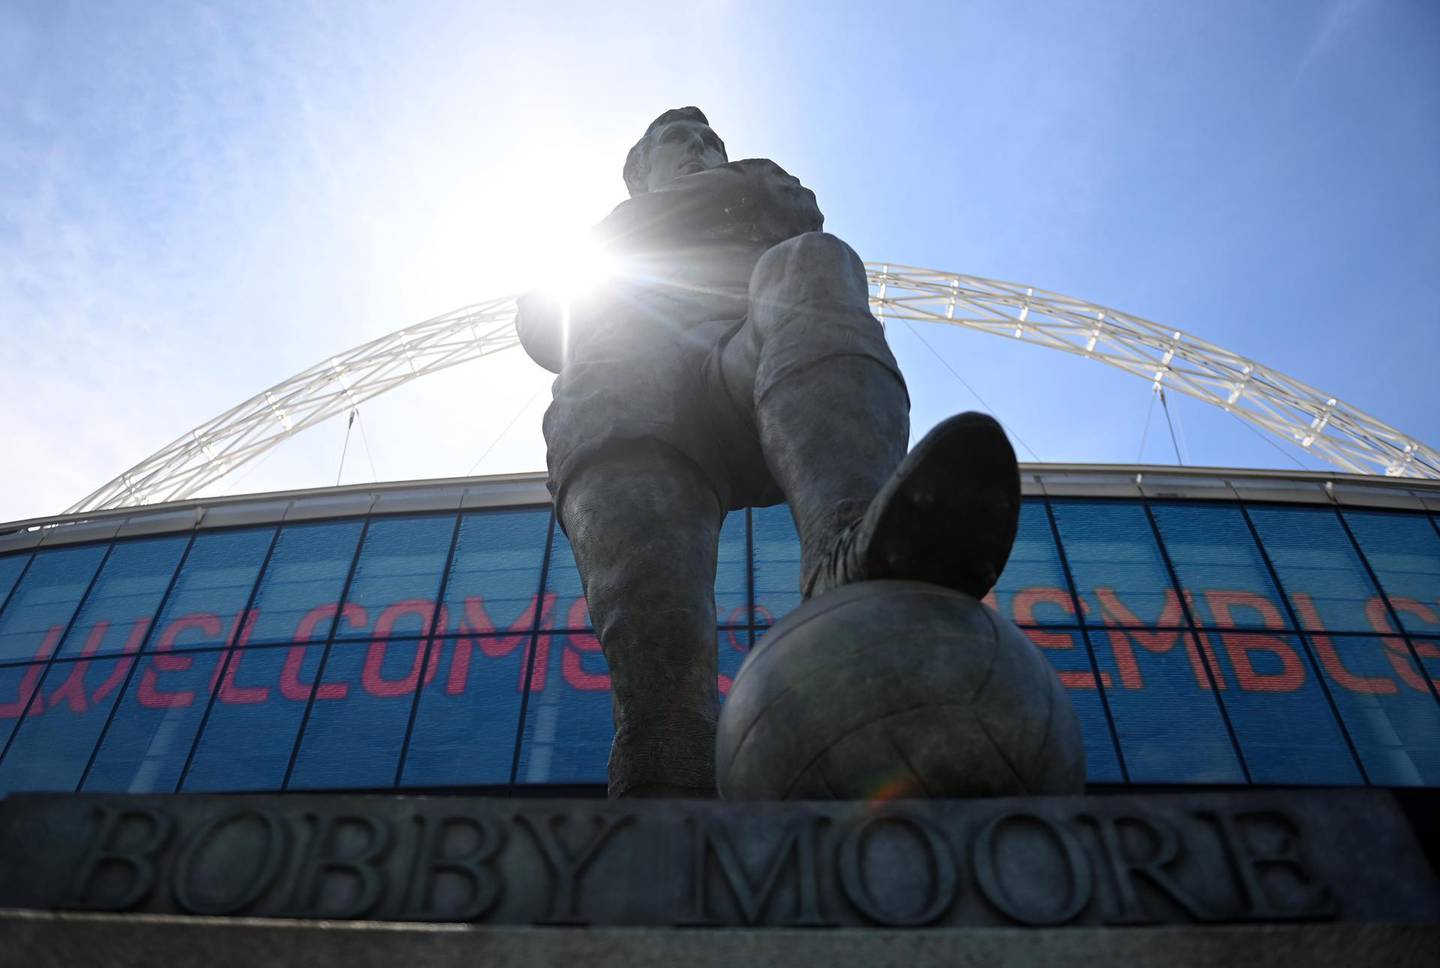 epa09254880 A monument to former England player Sir Bobby Moore outside Wembley Stadium ahead of the UEFA Euro 2020 soccer tournament in London, Britain, 08 June 2021. The tournament will take place on 11 June 2021 with the final at Wembley Stadium on 11 July 2021.  EPA/NEIL HALL